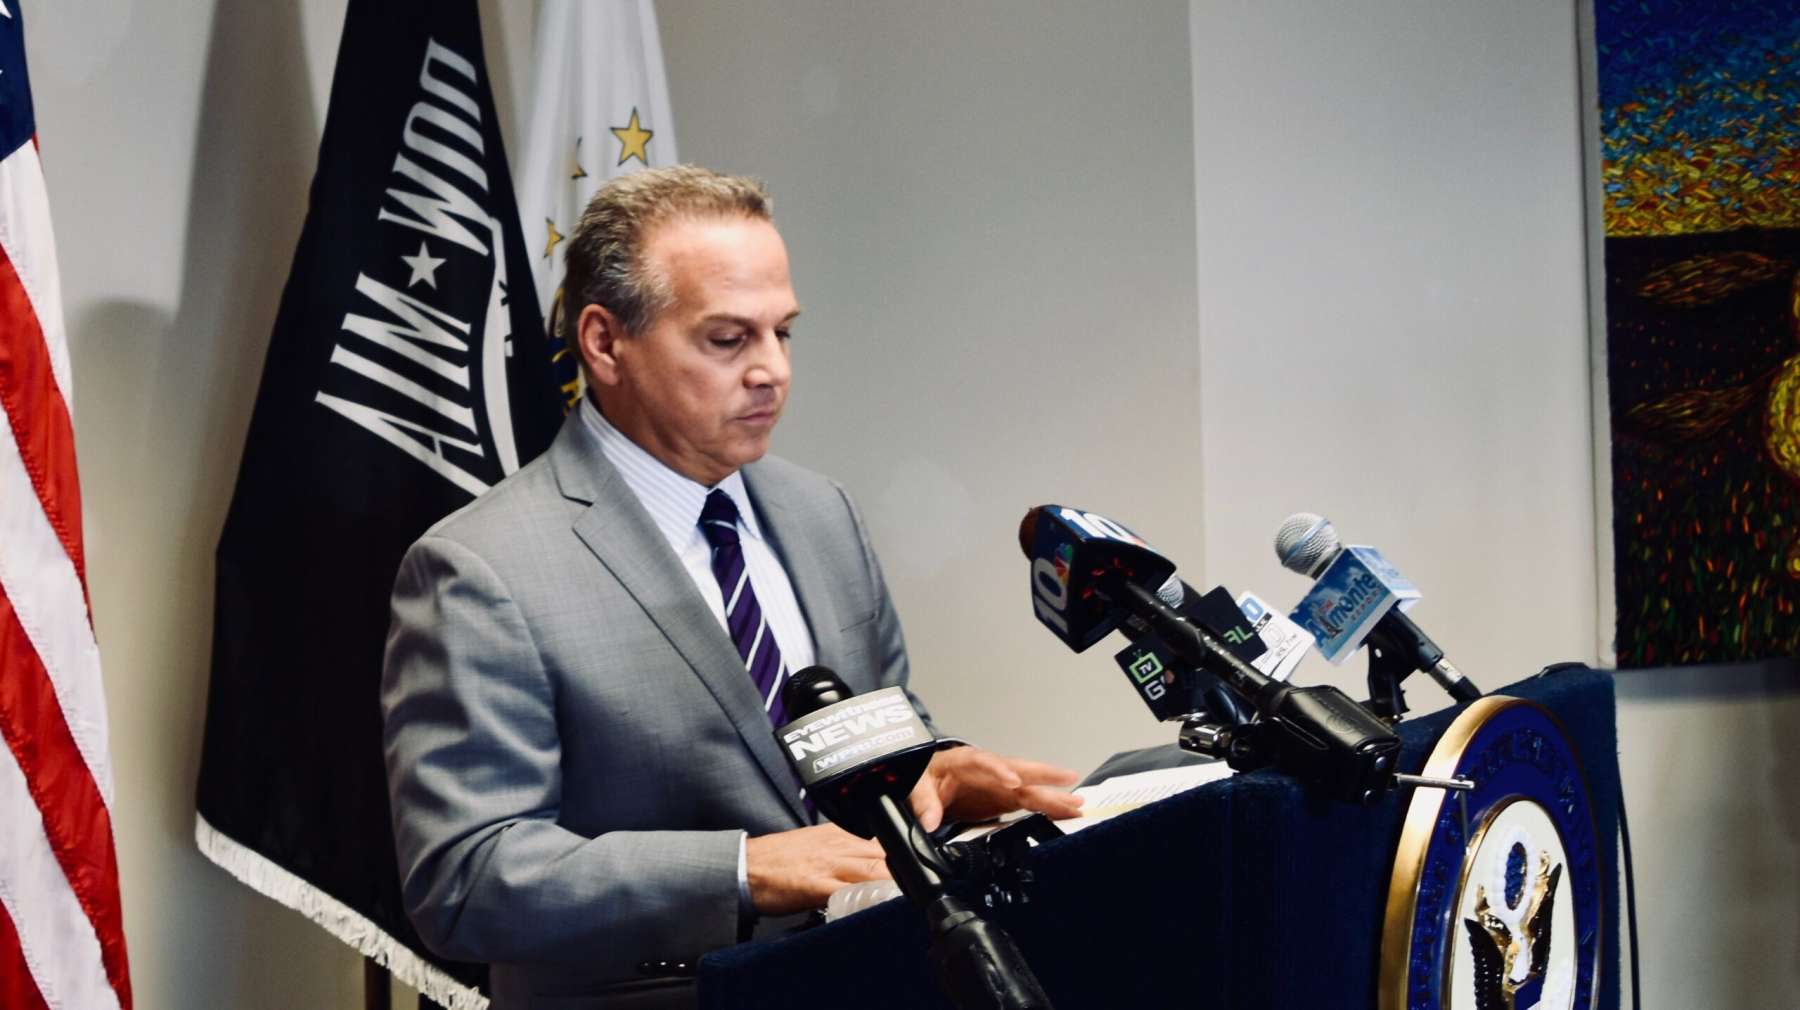 Cicilline: The Mueller Report ‘does not exonerate the President’